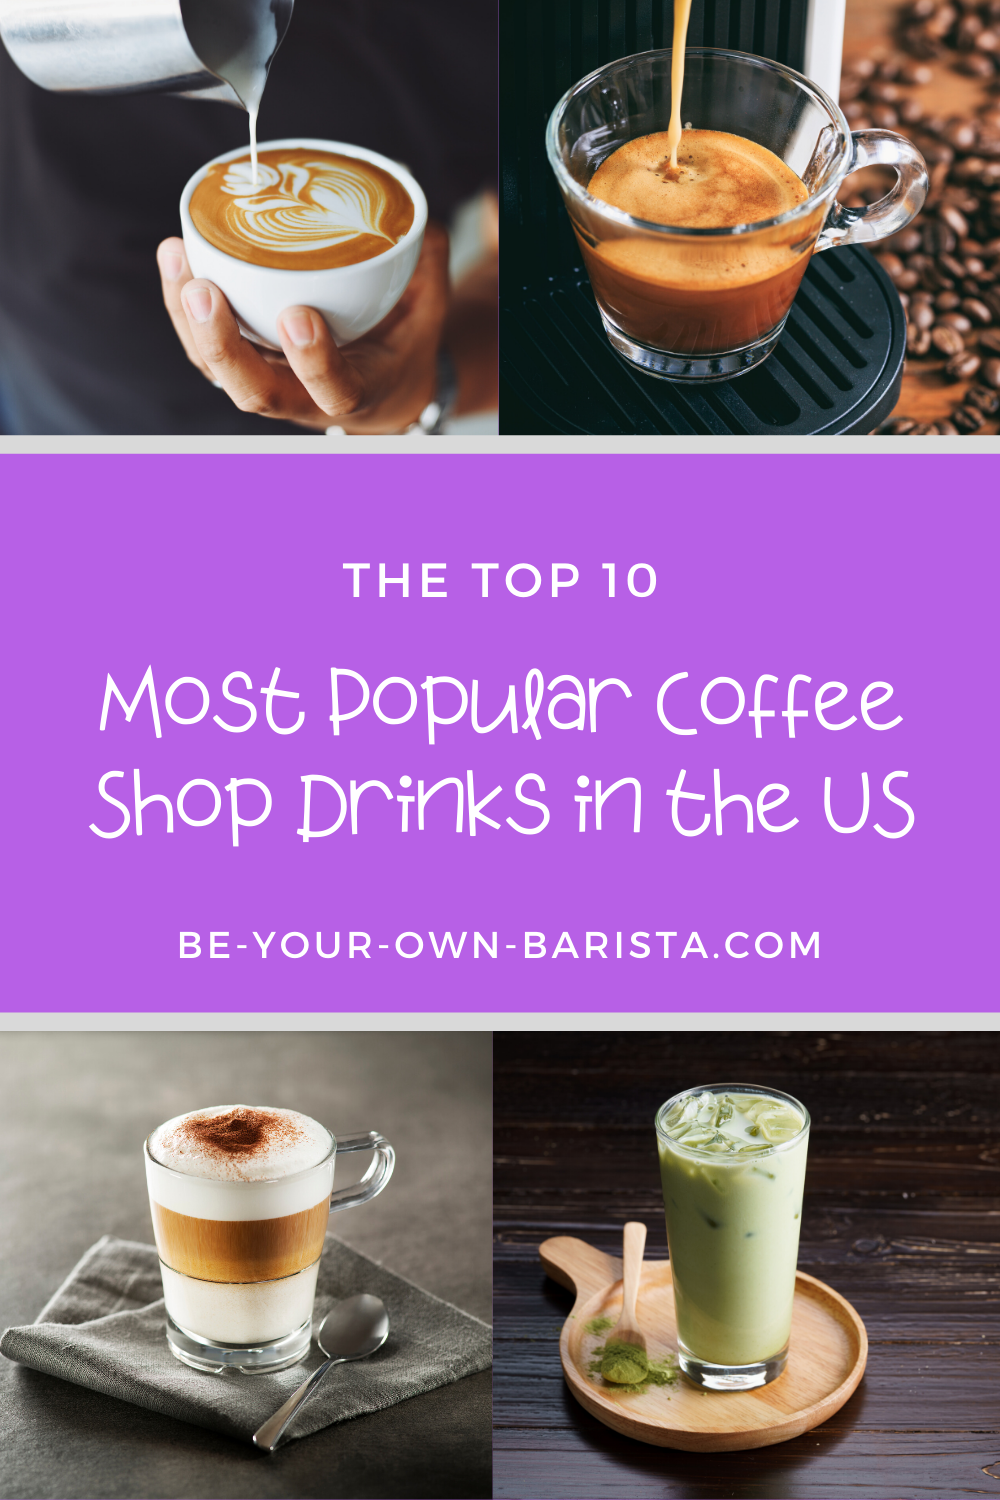 The Top 10 Most Popular Coffee Shop Drinks in the US